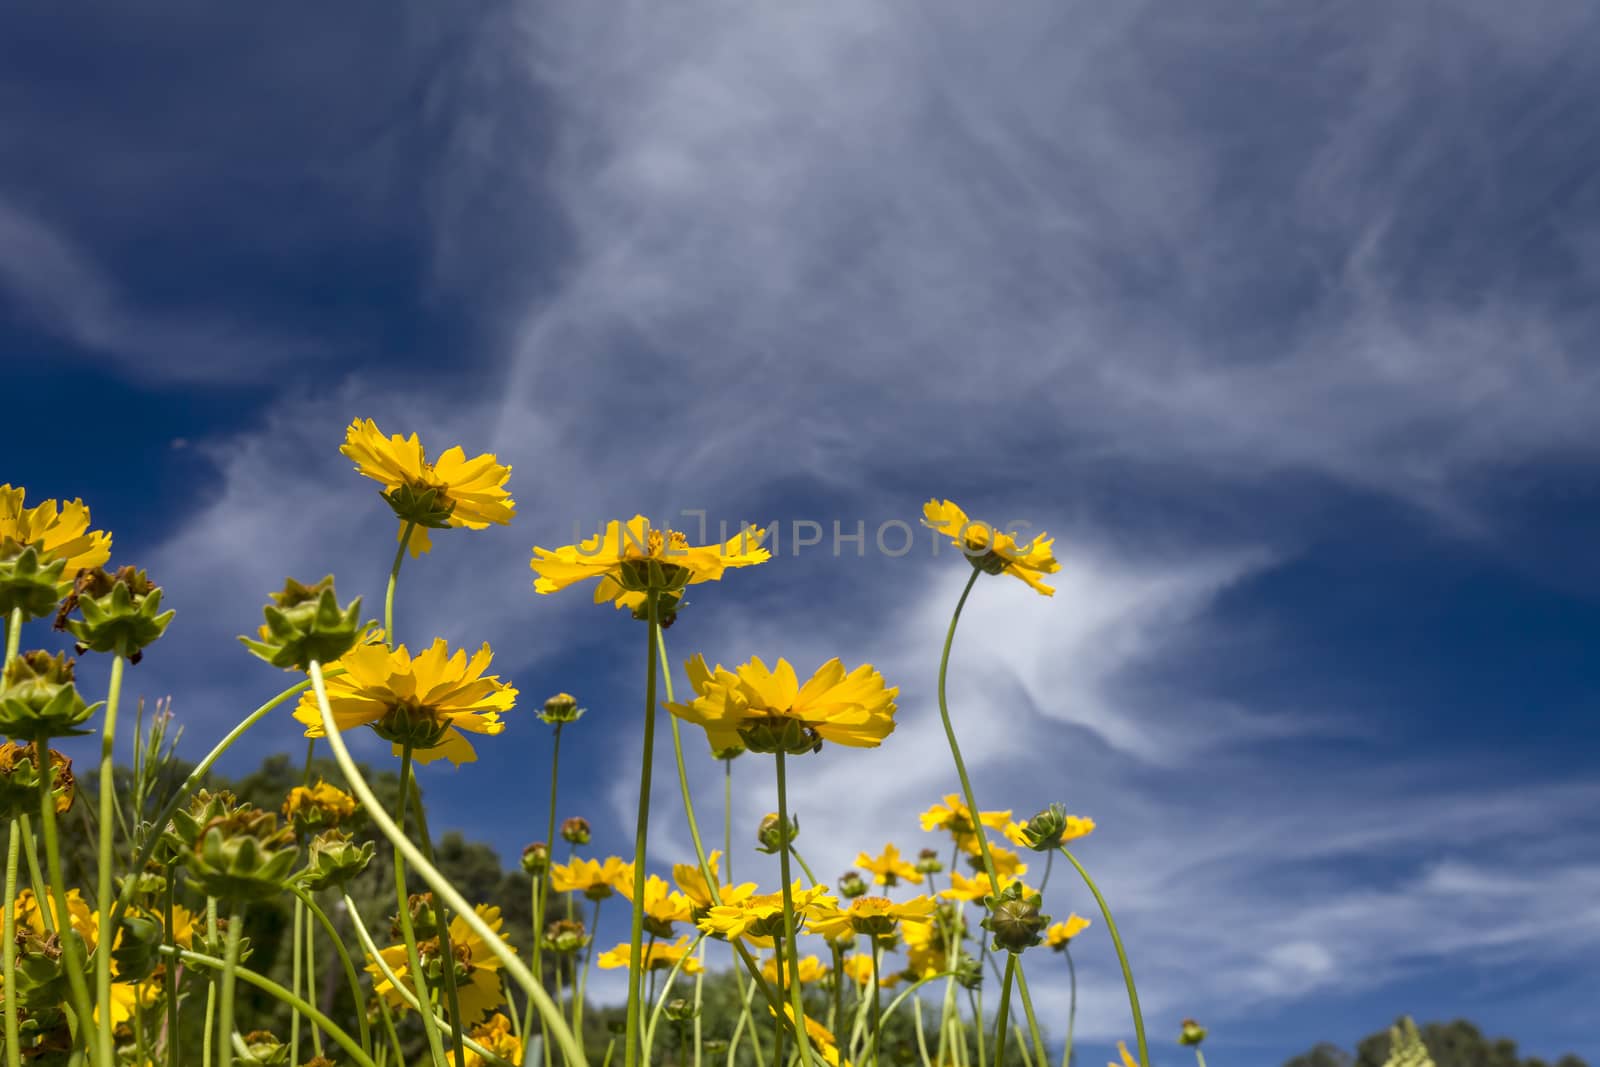 This photo was taken at a formal botanical garden near San Francisco, California. Spring had arrived, and flowers are in bloom. This image features a beautiful yellow flowers and with a deep blue sky with wispy clouds.